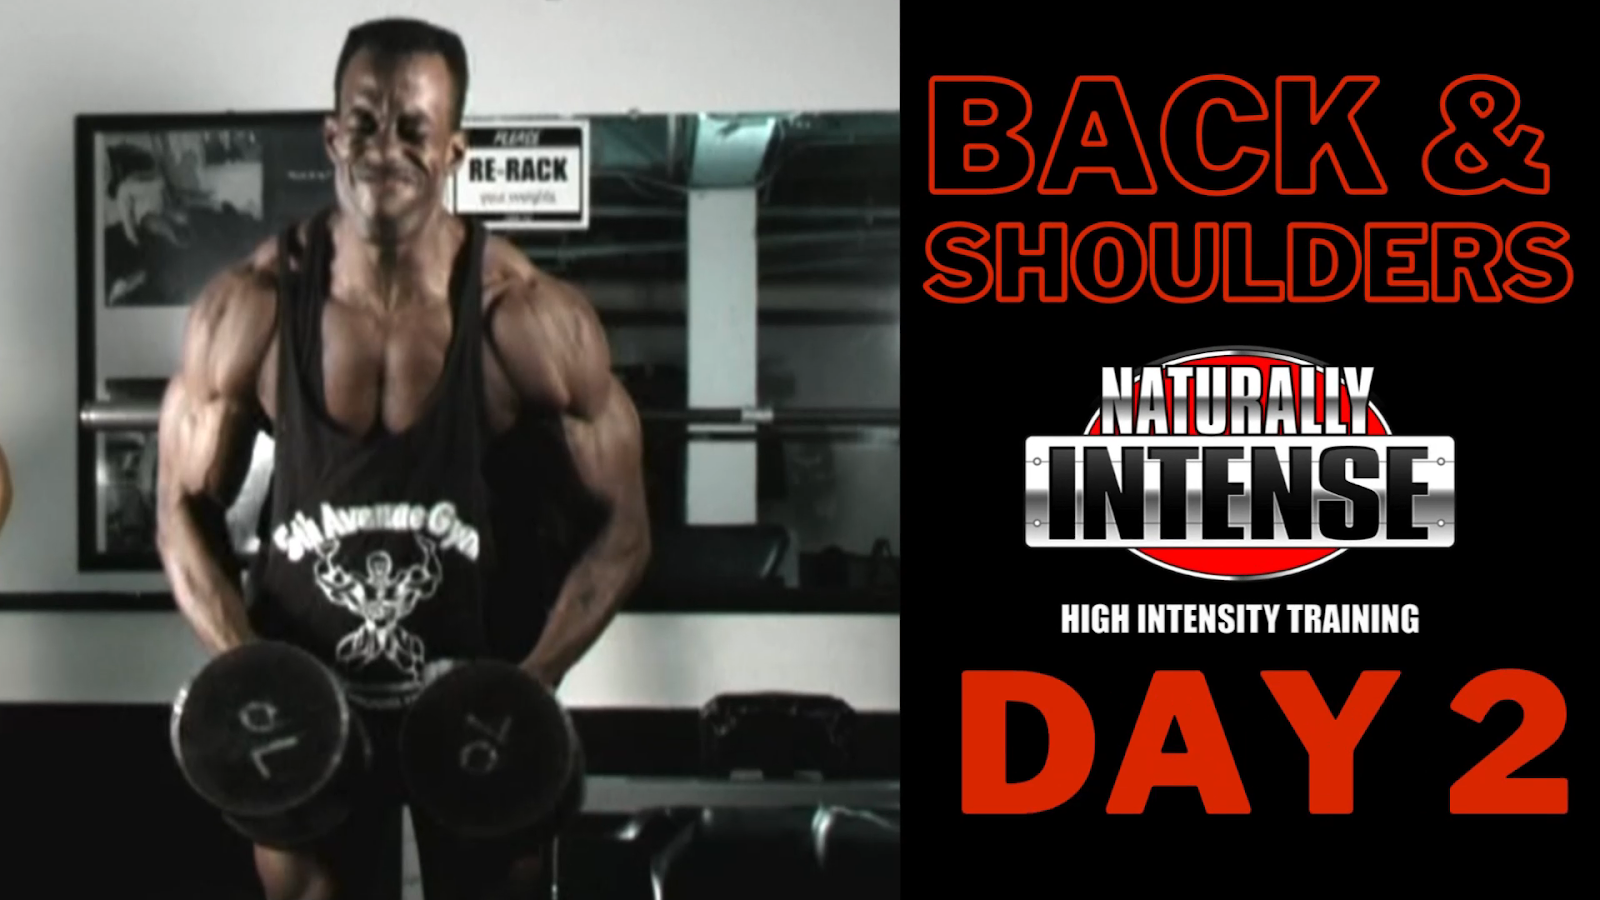 Bodybuilder Kevin Richardson's high intensity training split has back and shoulders as day 2